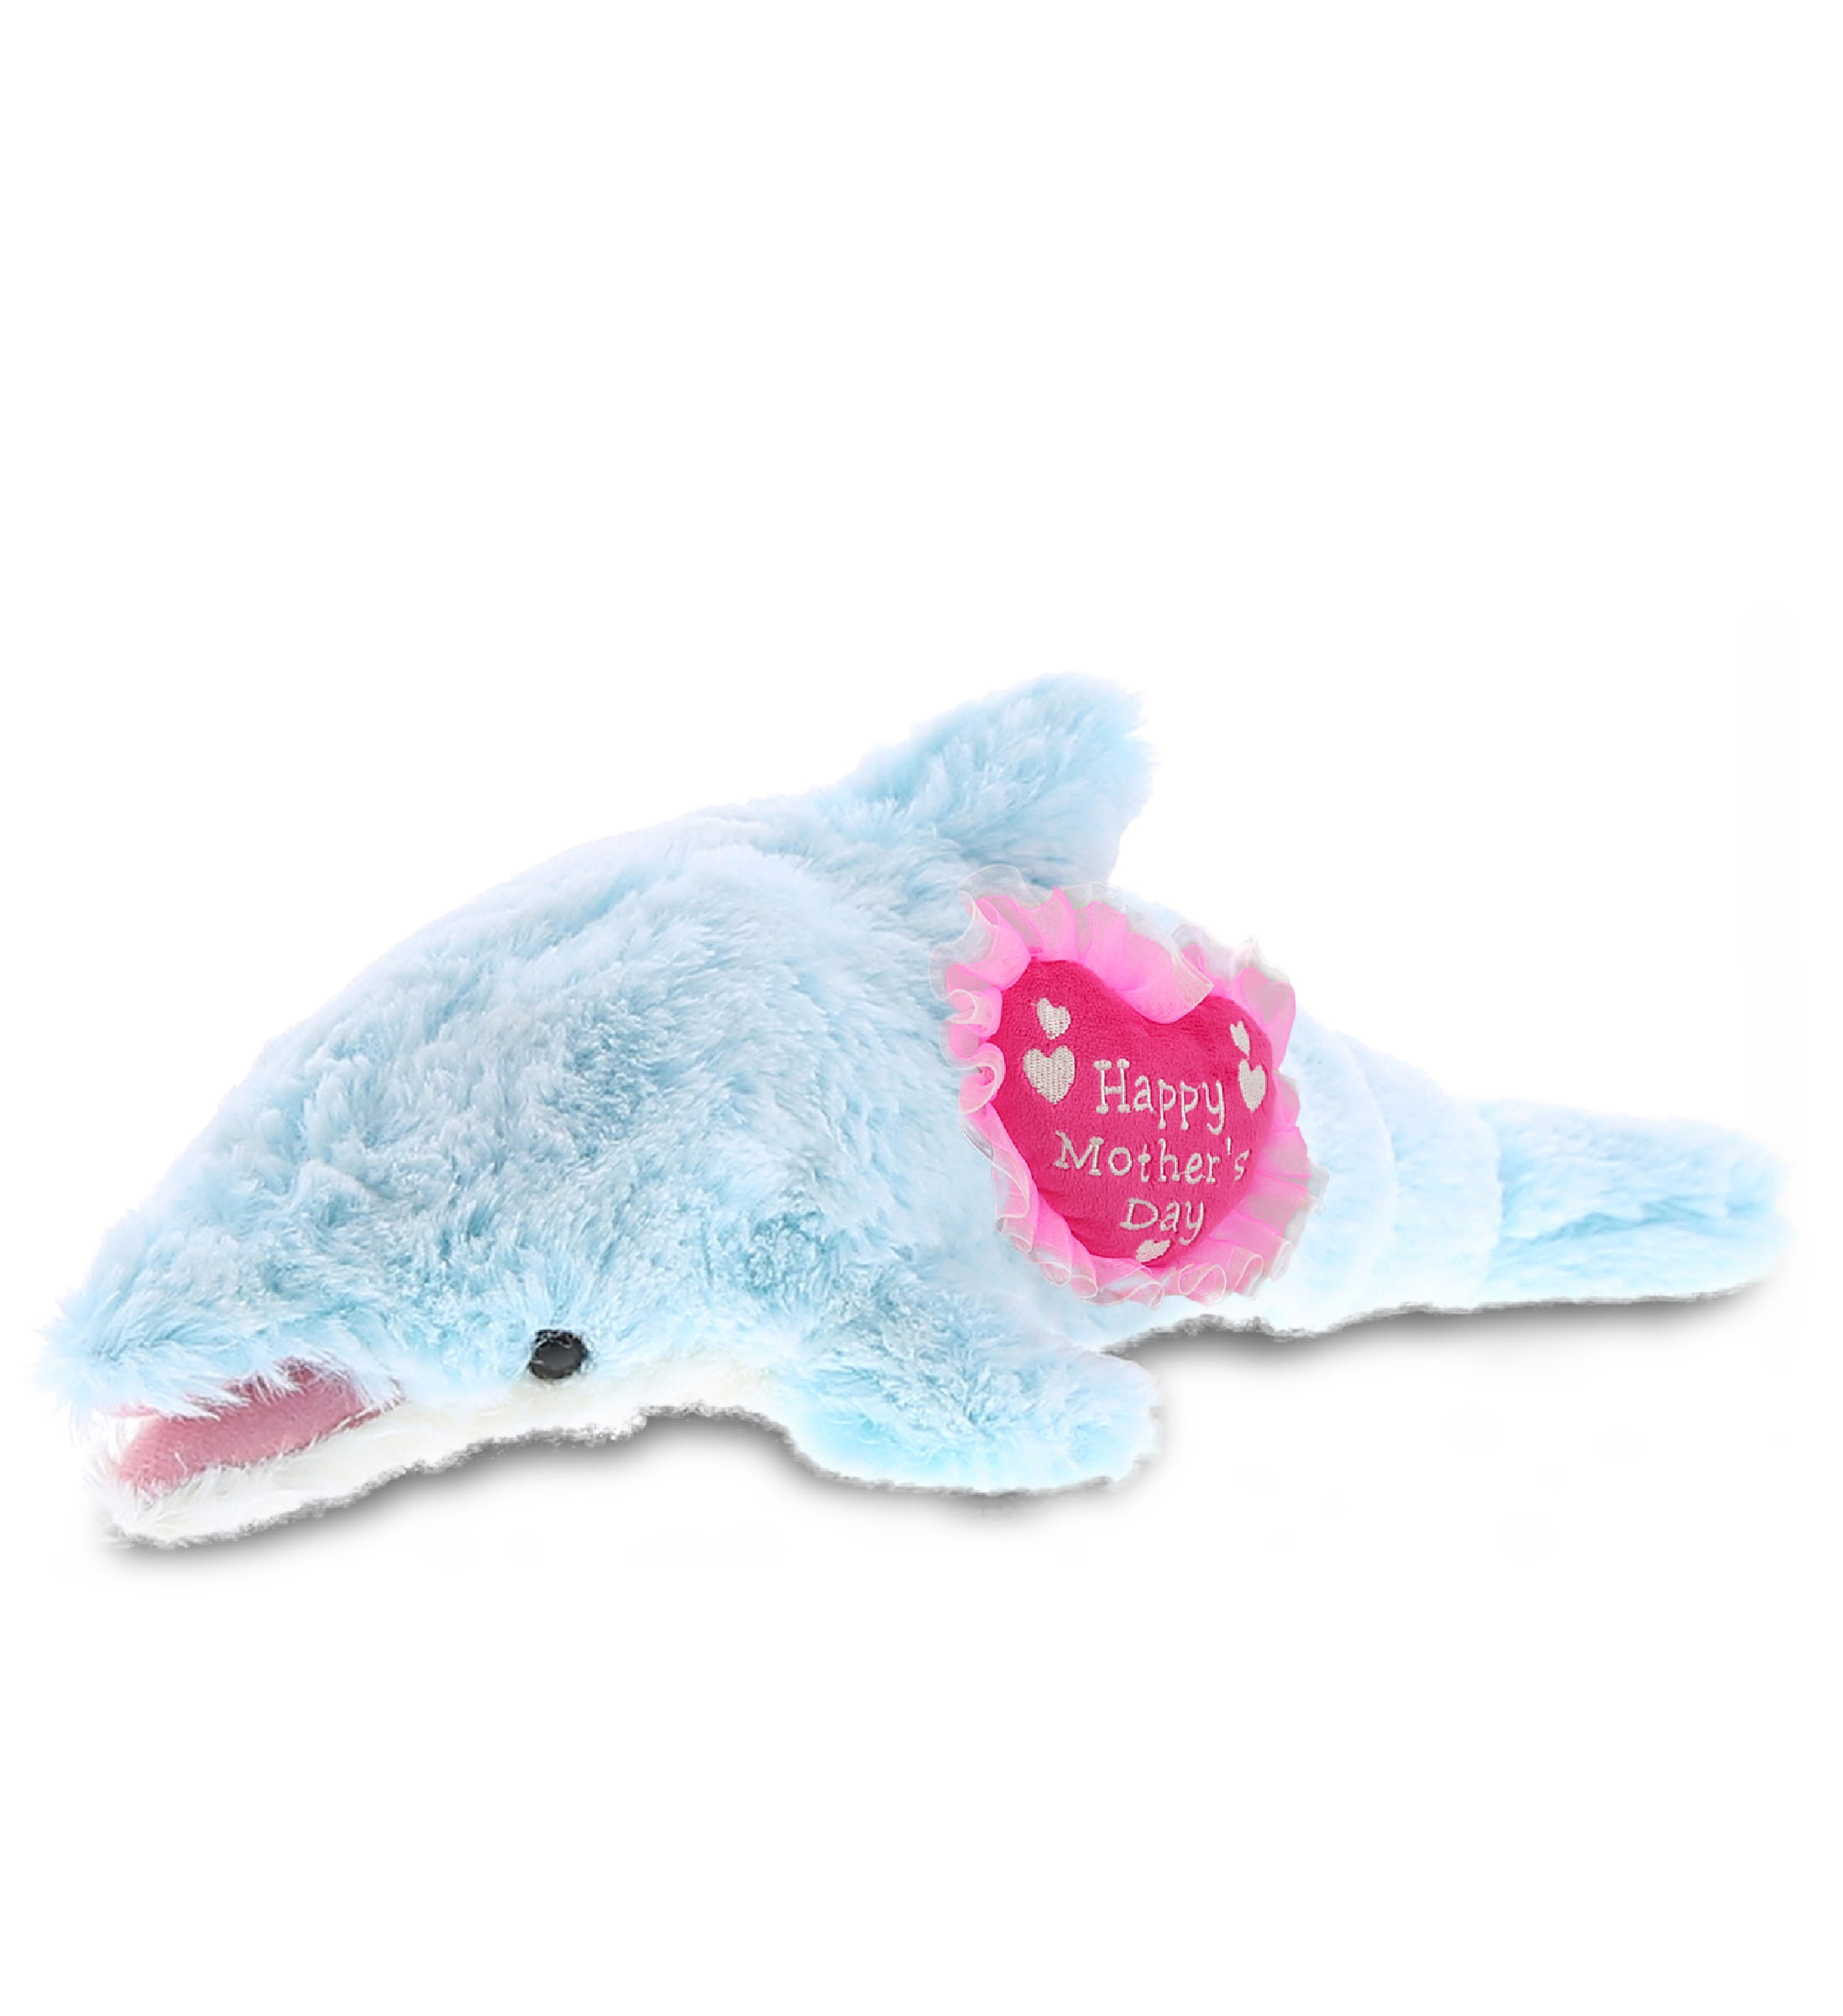 Grandma DolliBu Happy Mother's Day Personalized Soft Plush Blue Dolphin with Pink Heart Message for Best Mommy Wife 11.75 Daughter